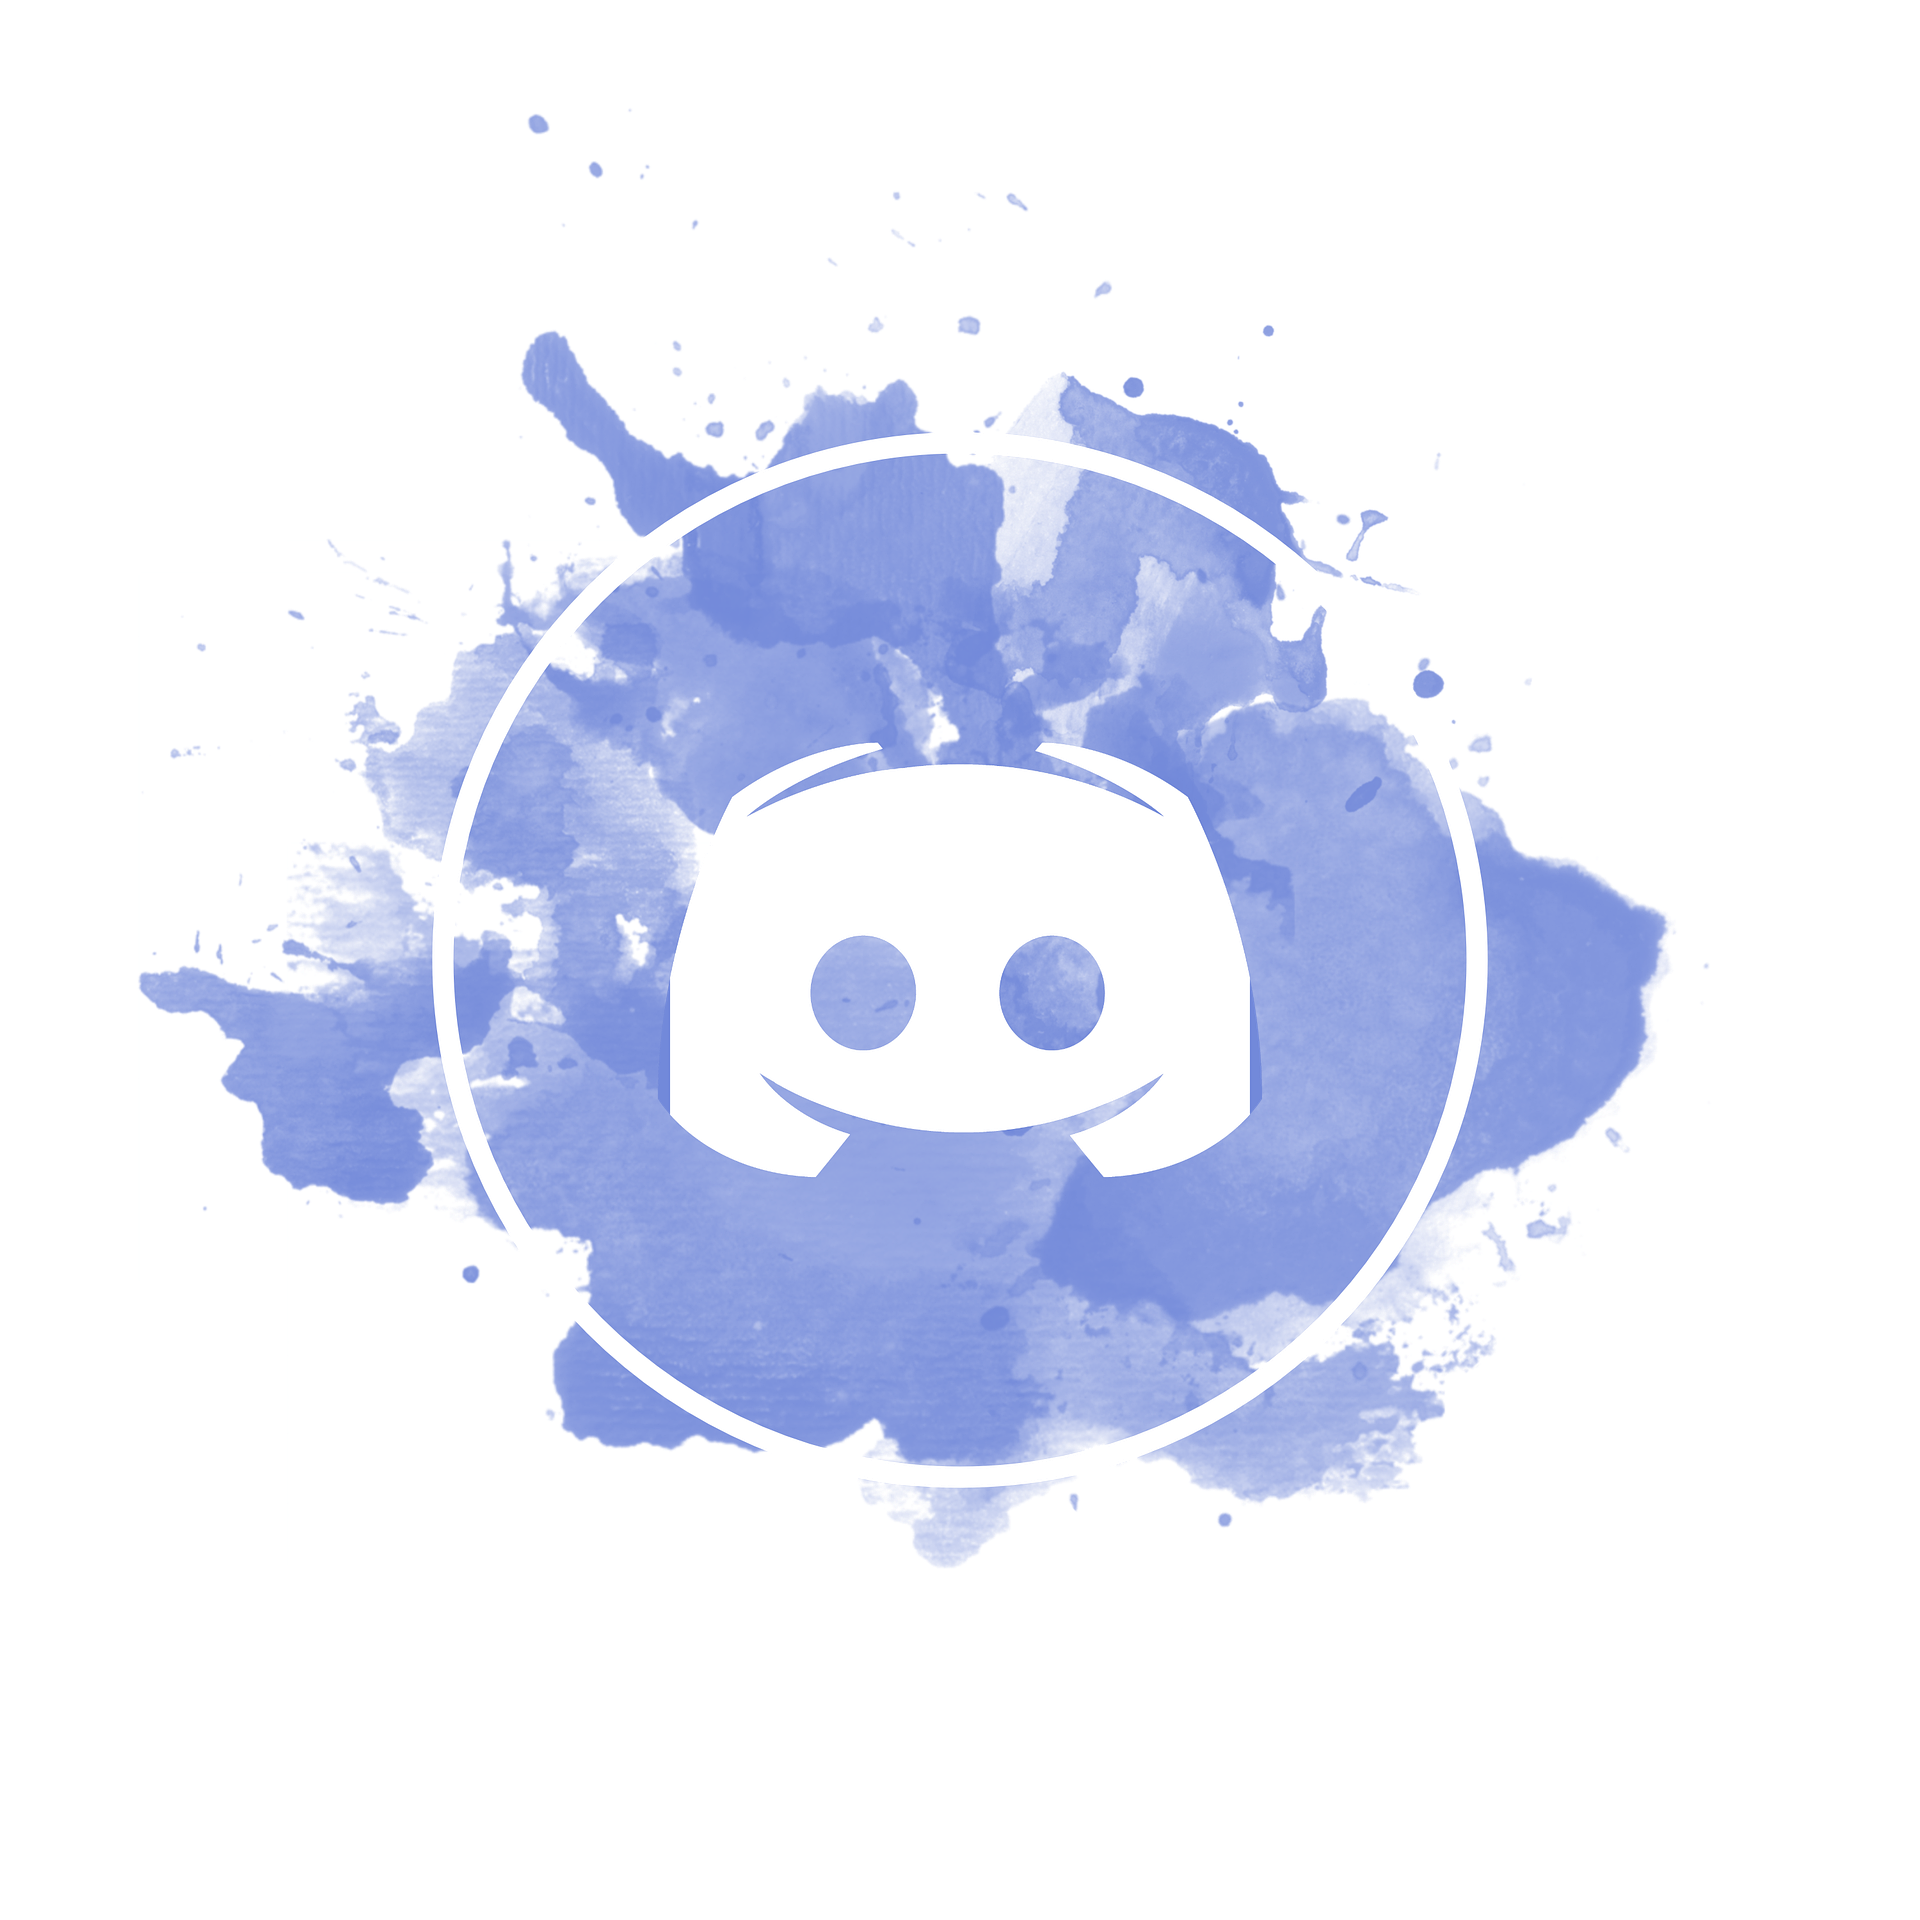 Is Discord Safe?